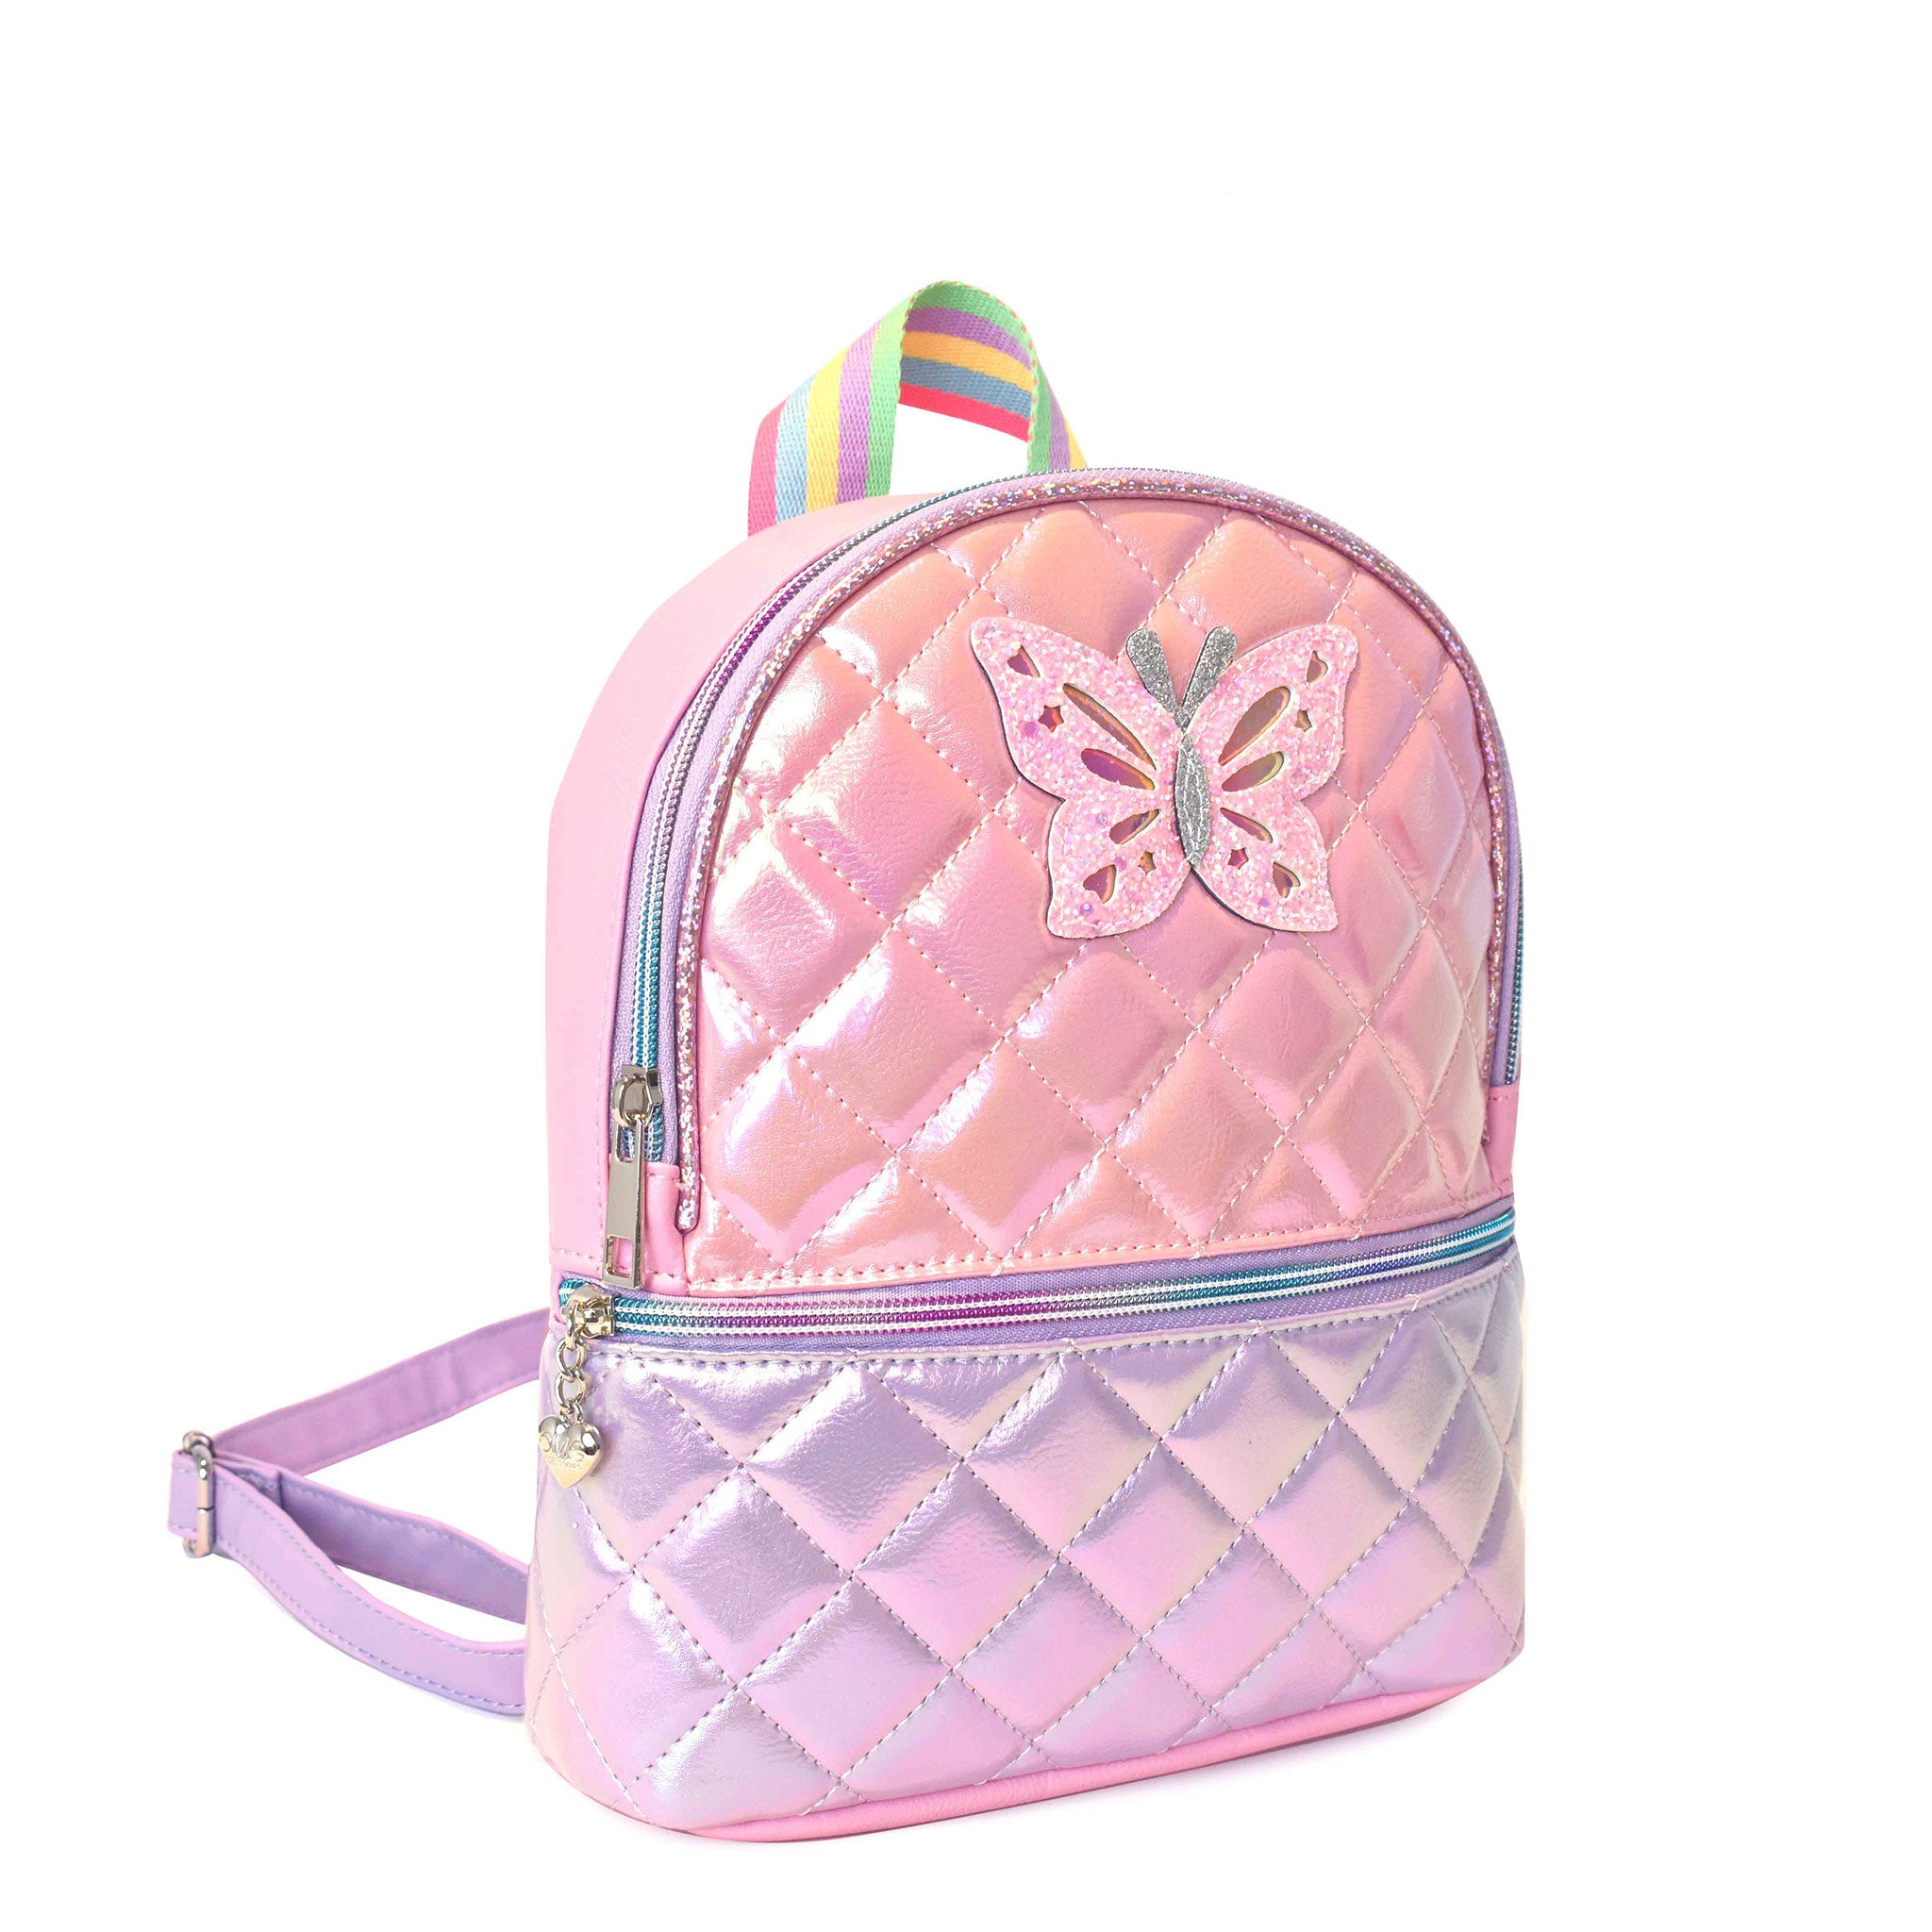 Side view of a two-toned pink and purple metallic quilted mini backpack embellished with a glitter butterfly appliqué\